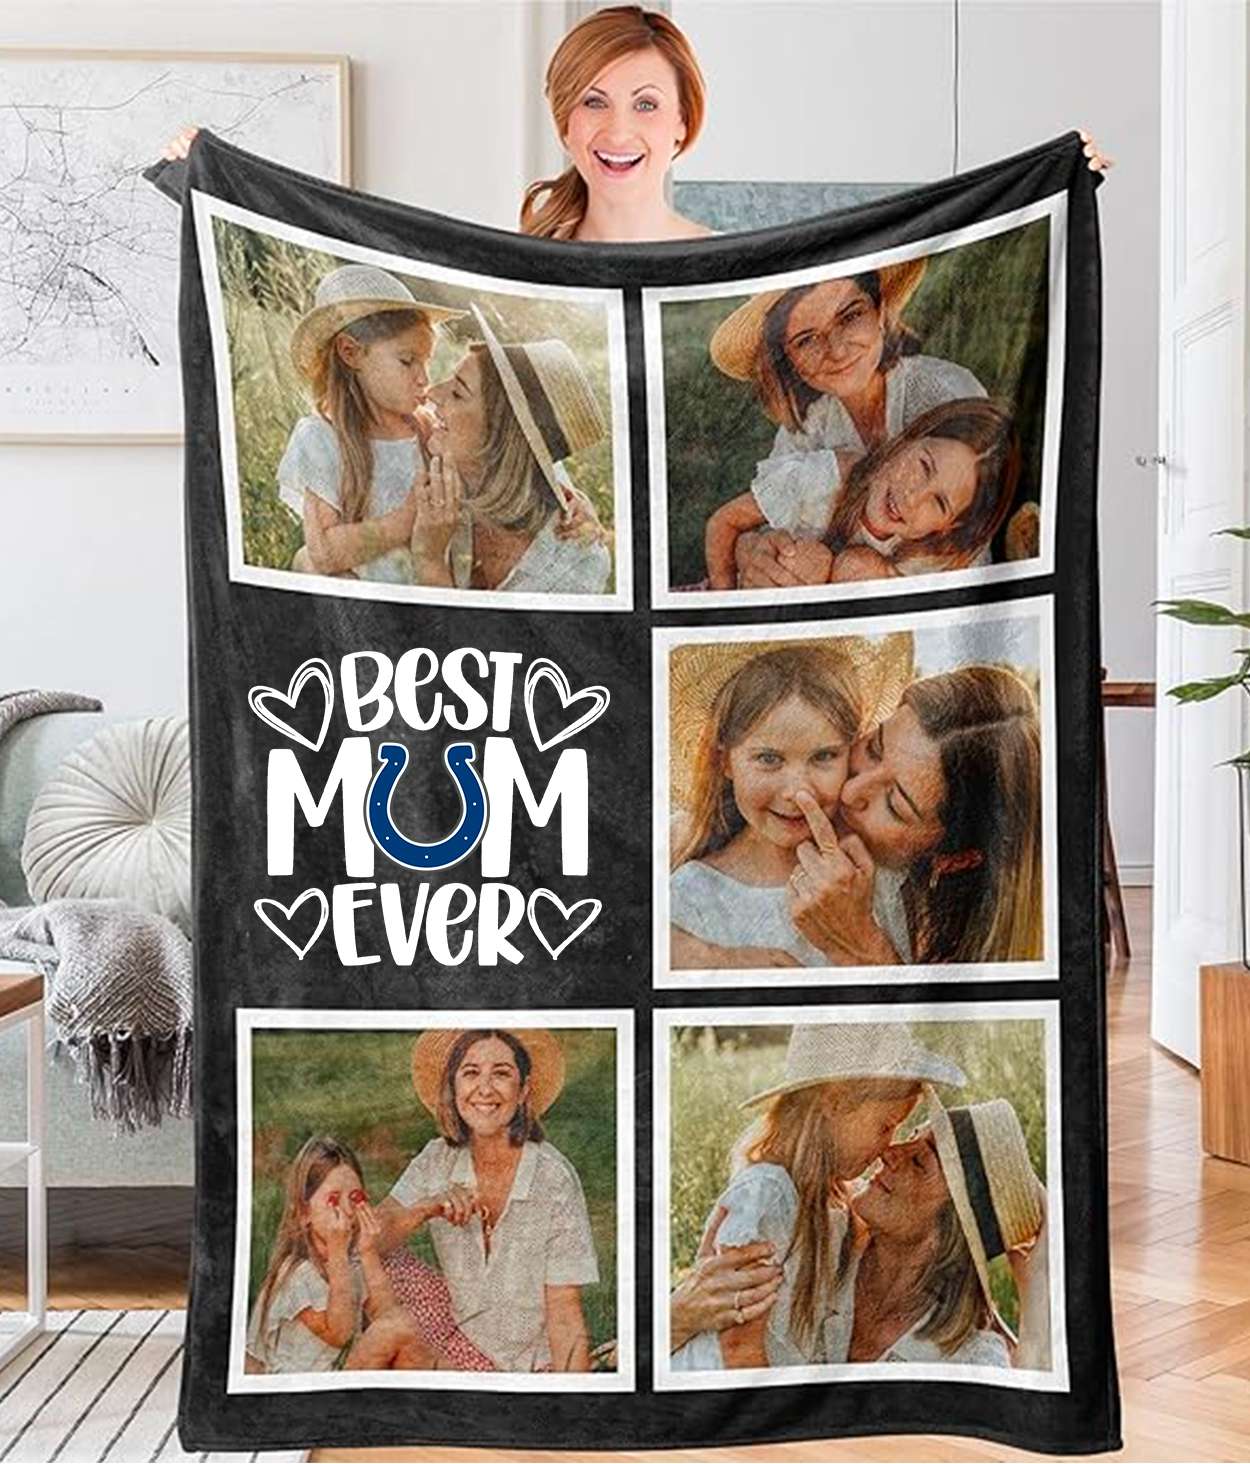 Best Mom Ever - Custom NFL Indianapolis Colts Blankets with Pictures for Mother's Day Gift